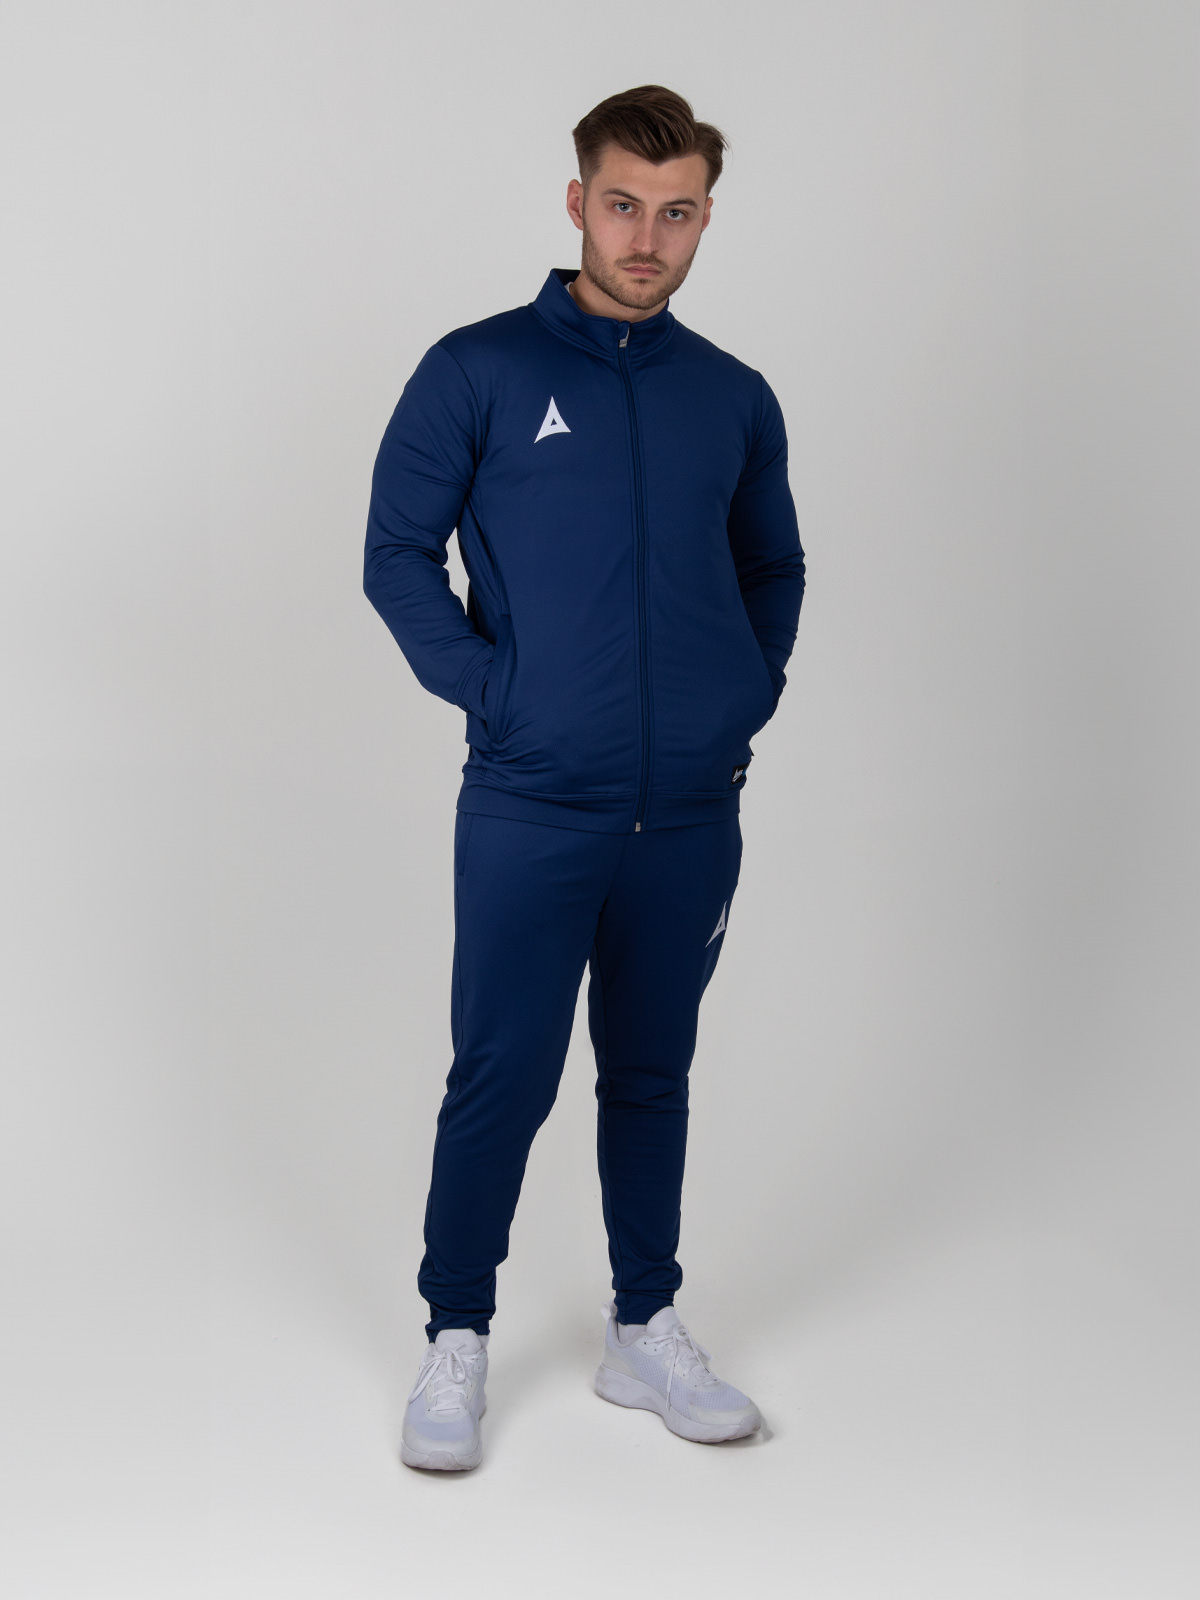 a man is wearing a fully zipped navy tracksuit jacket and matching navy jogging bottoms